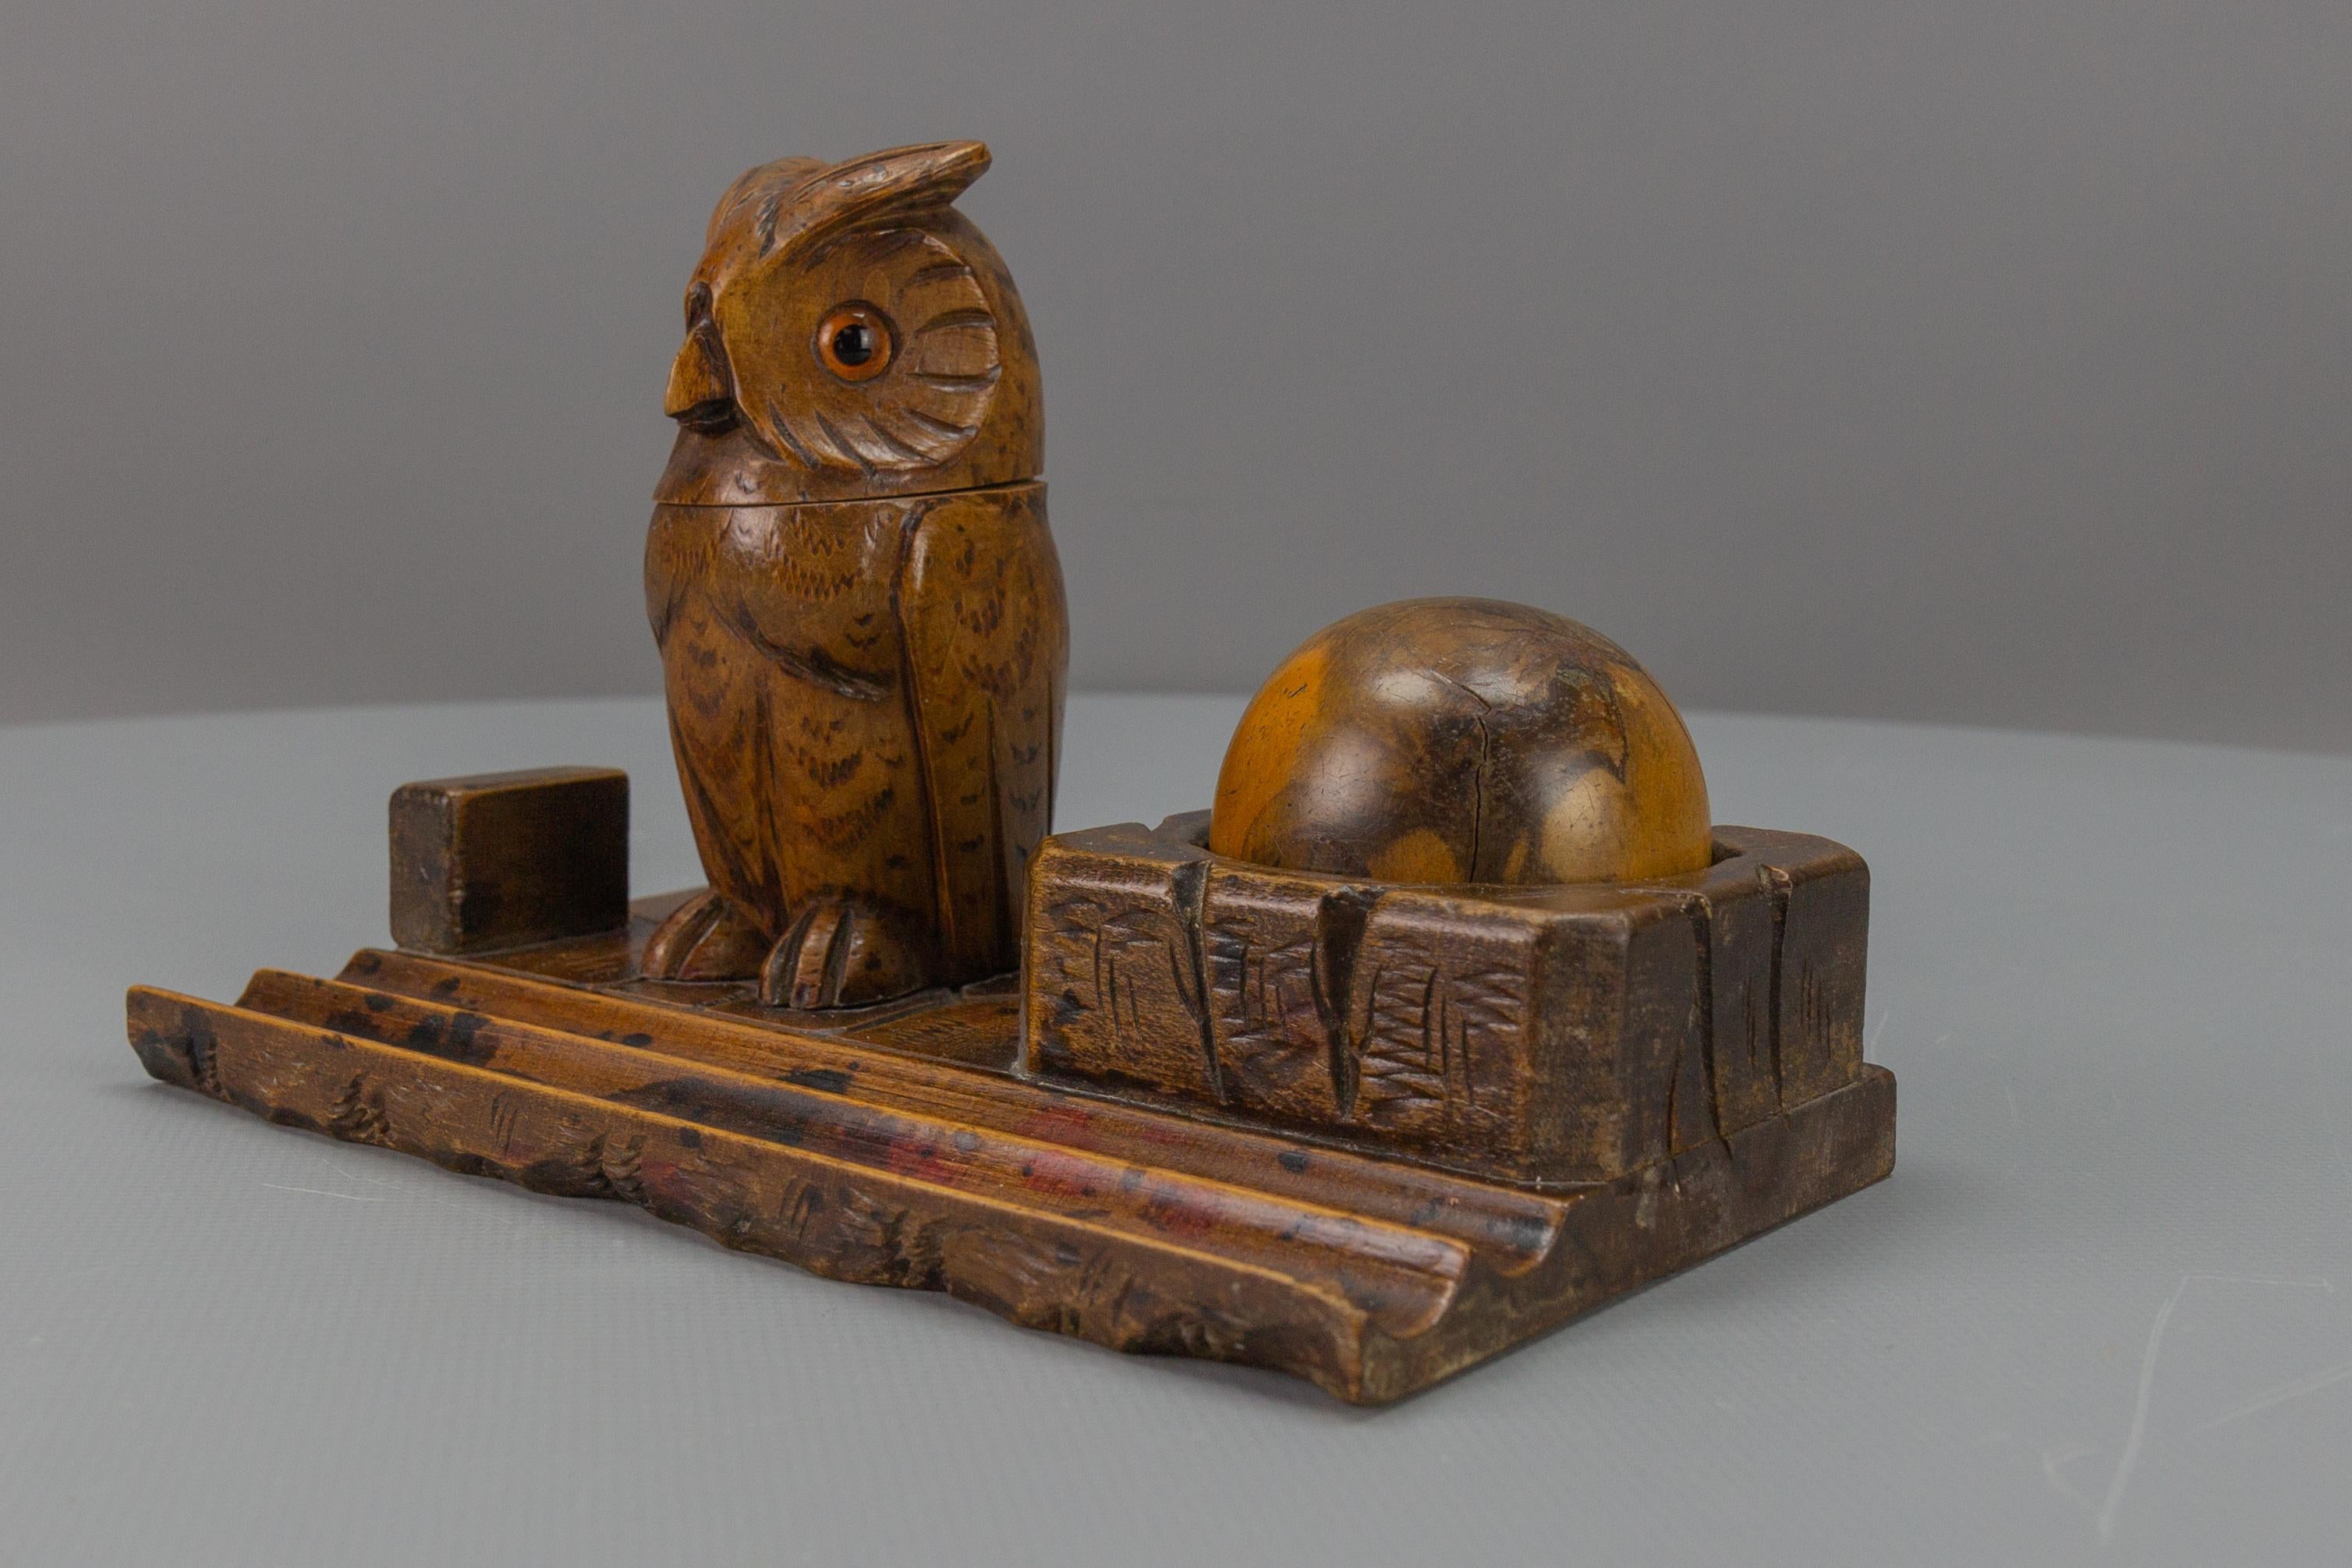 Metal Hand-Carved Wooden Inkwell or Pen Stand with Owl Figure, 1920s For Sale